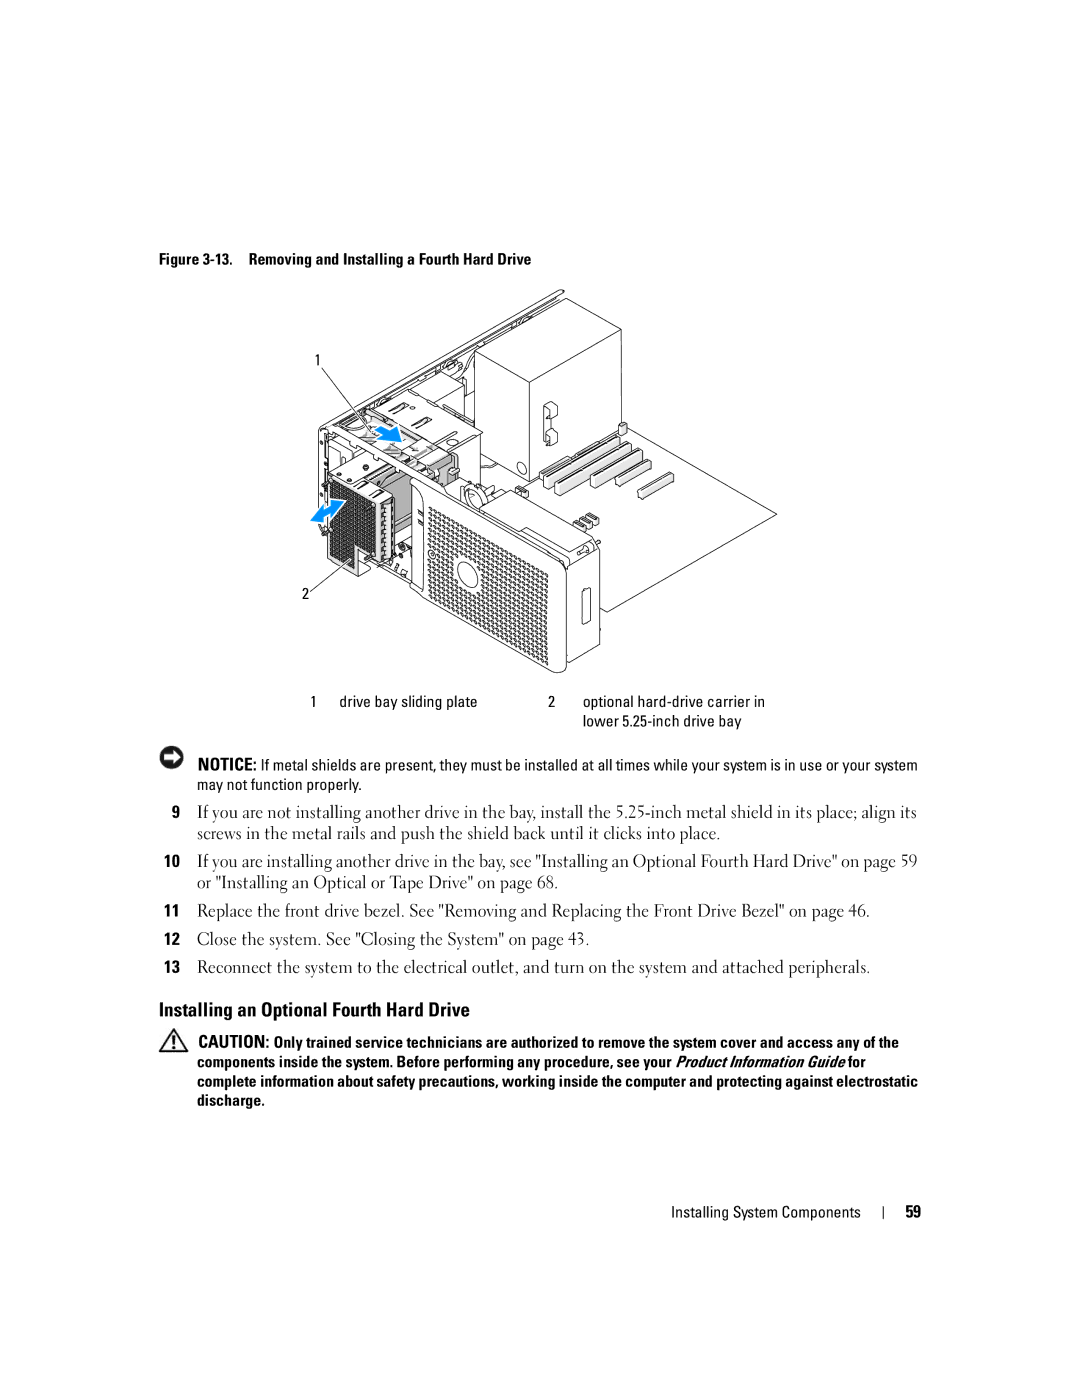 Dell SC1430 owner manual Installing an Optional Fourth Hard Drive, Lower 5.25-inch drive bay 